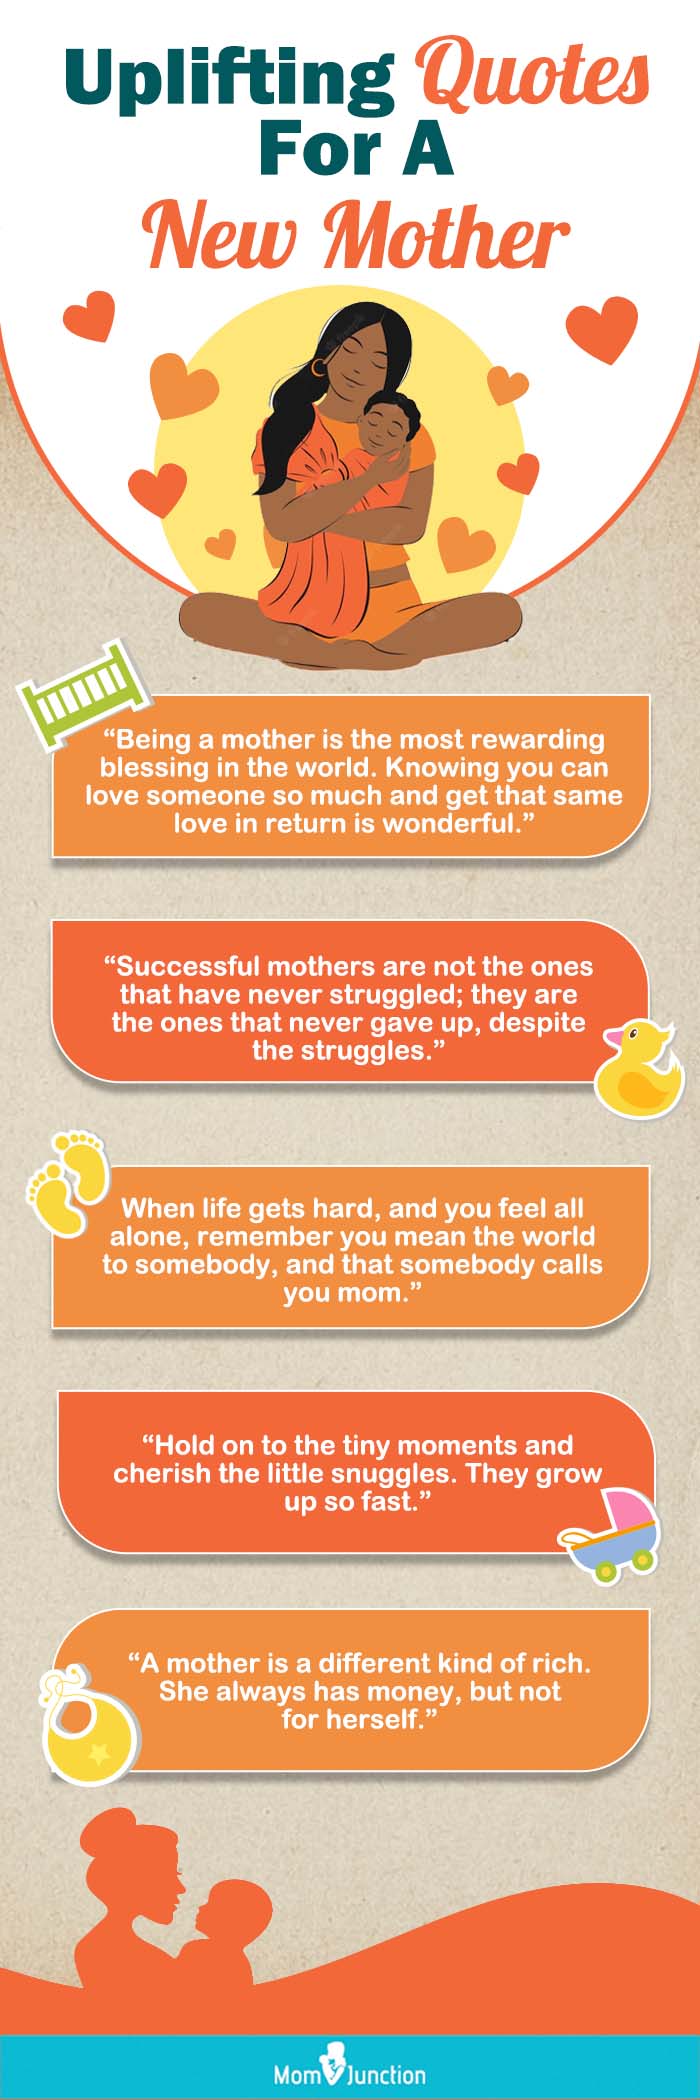 21 Inspirational Quotes For Moms